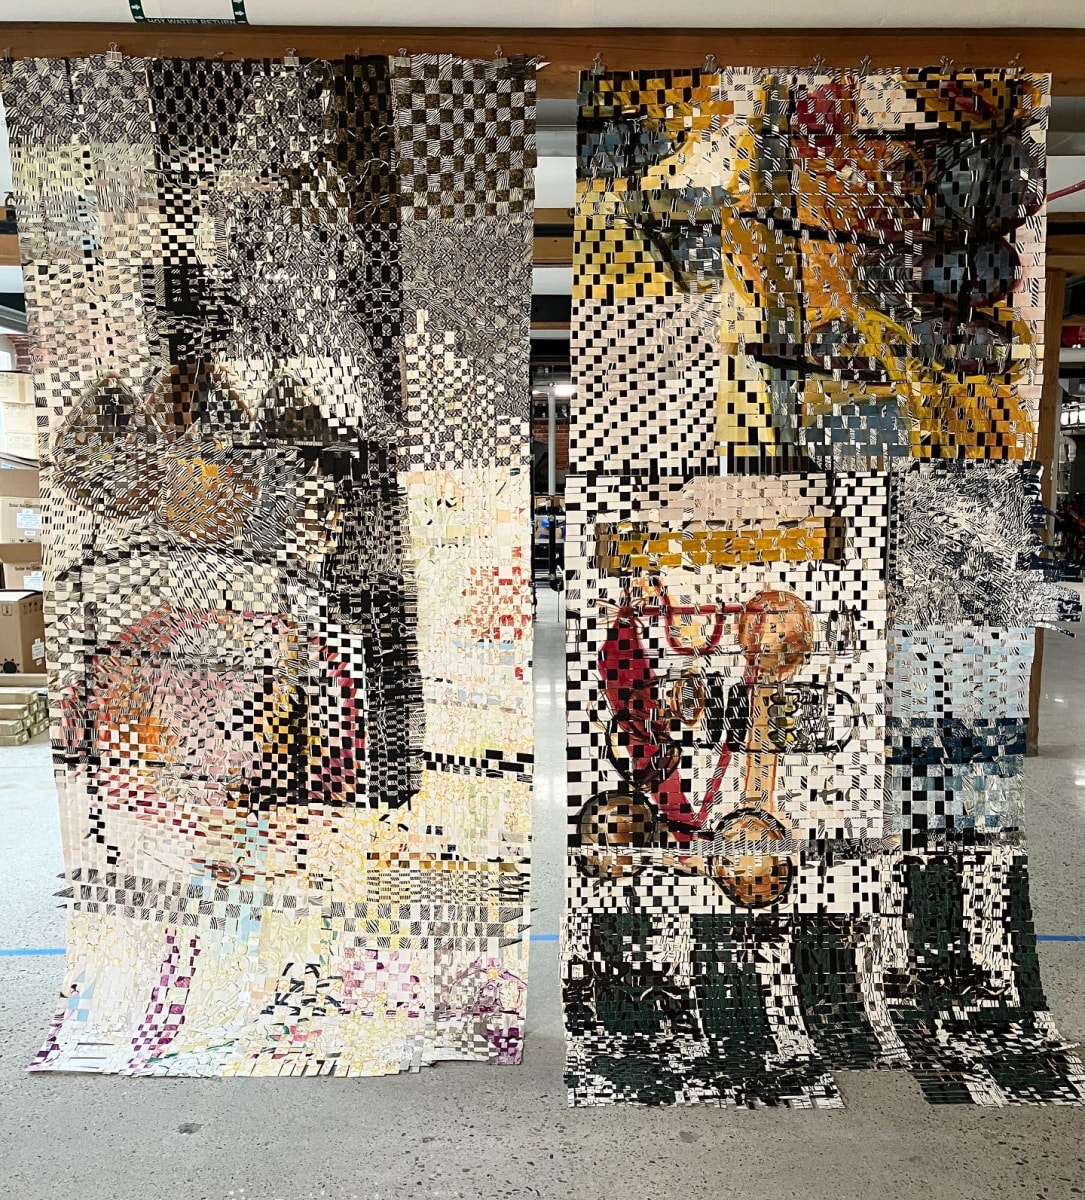 Three Decades (two individual pieces shown together) by Hilary Lorenz  Image: In progress in the studio